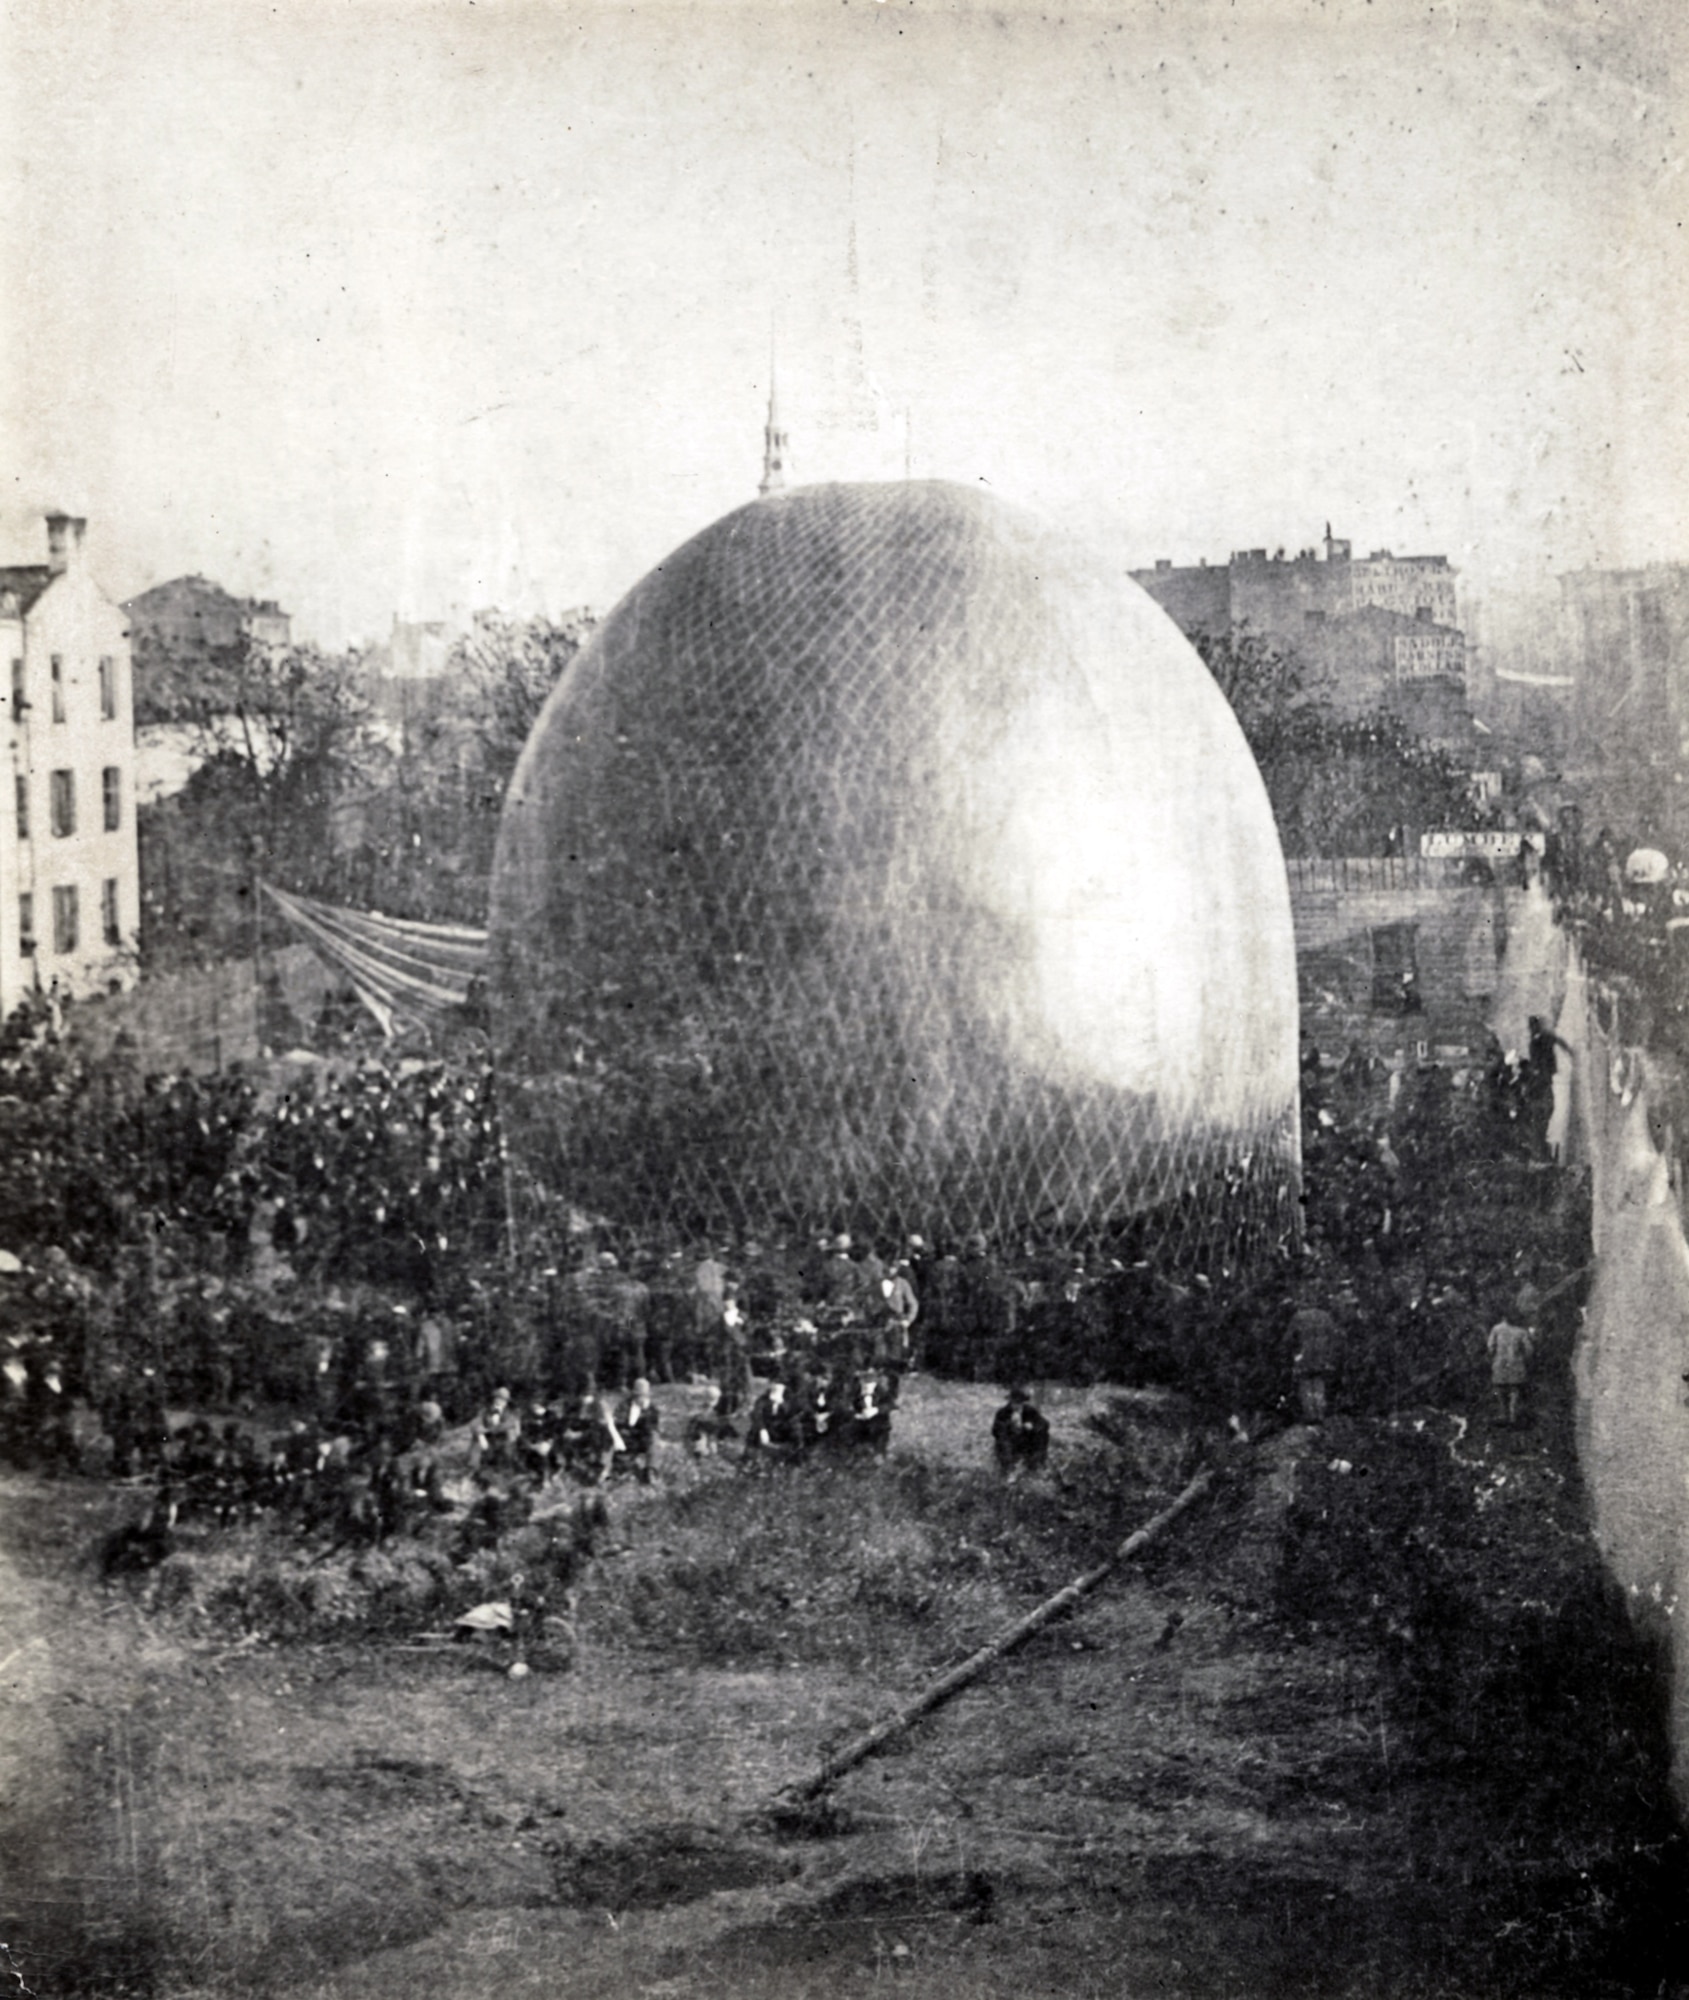 Thaddeus Lowe's balloon, Enterprise, is inflated in Cincinnati in 1861. Mr. Lowe demonstrated the balloon for President Abraham Lincoln. (Courtesy photo/Smithsonian Institution)